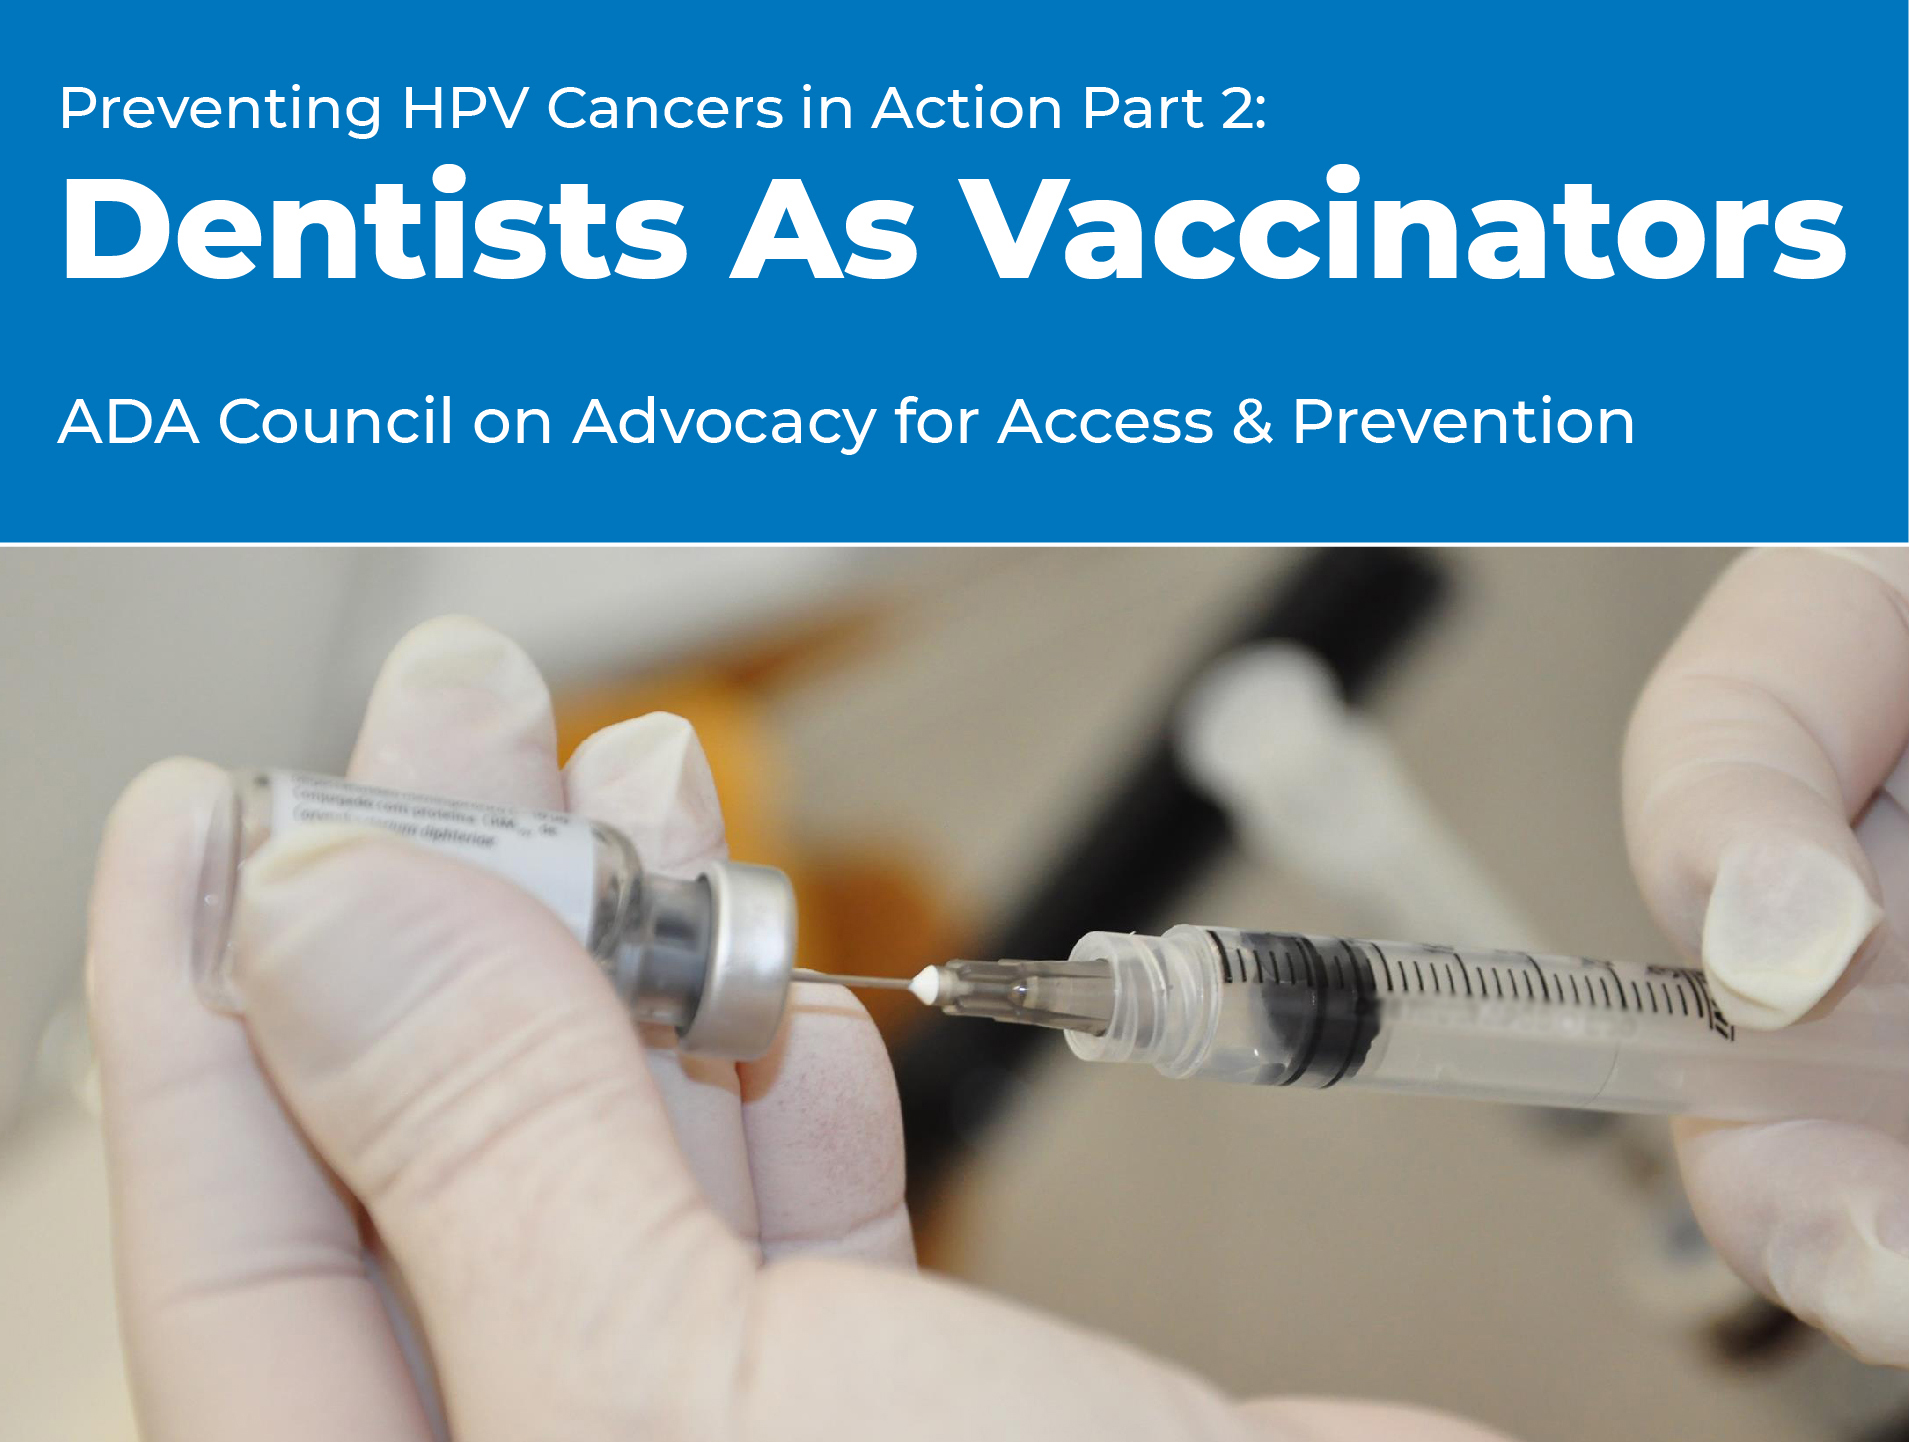 Preventing HPV Cancers in Action Part 2: Dentists As Vaccinators